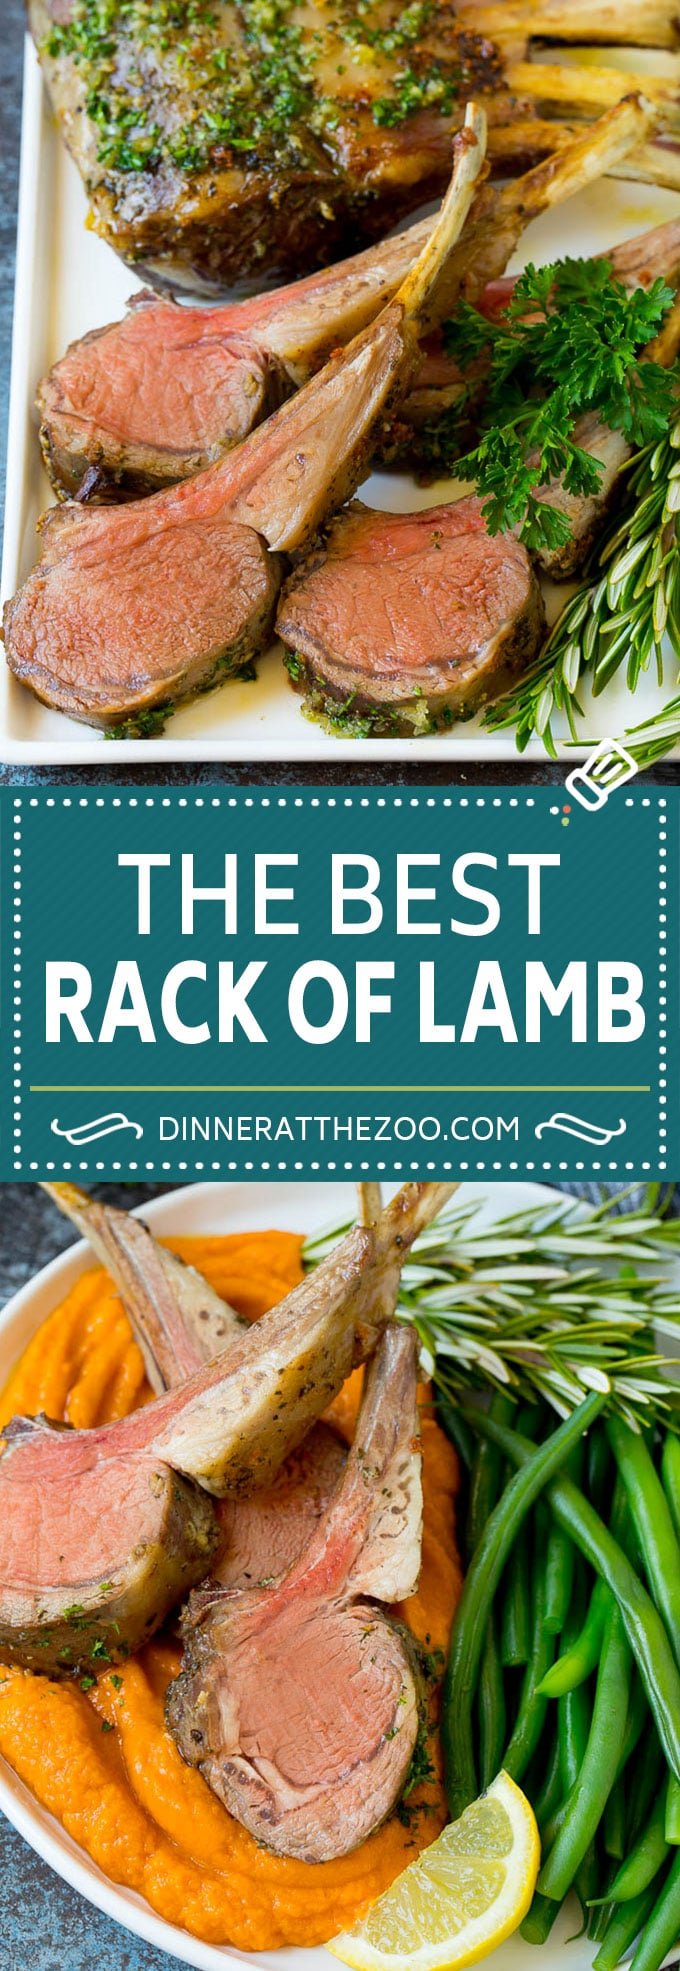 This rack of lamb is coated with garlic and fresh herbs, then roasted in the oven until tender and juicy.